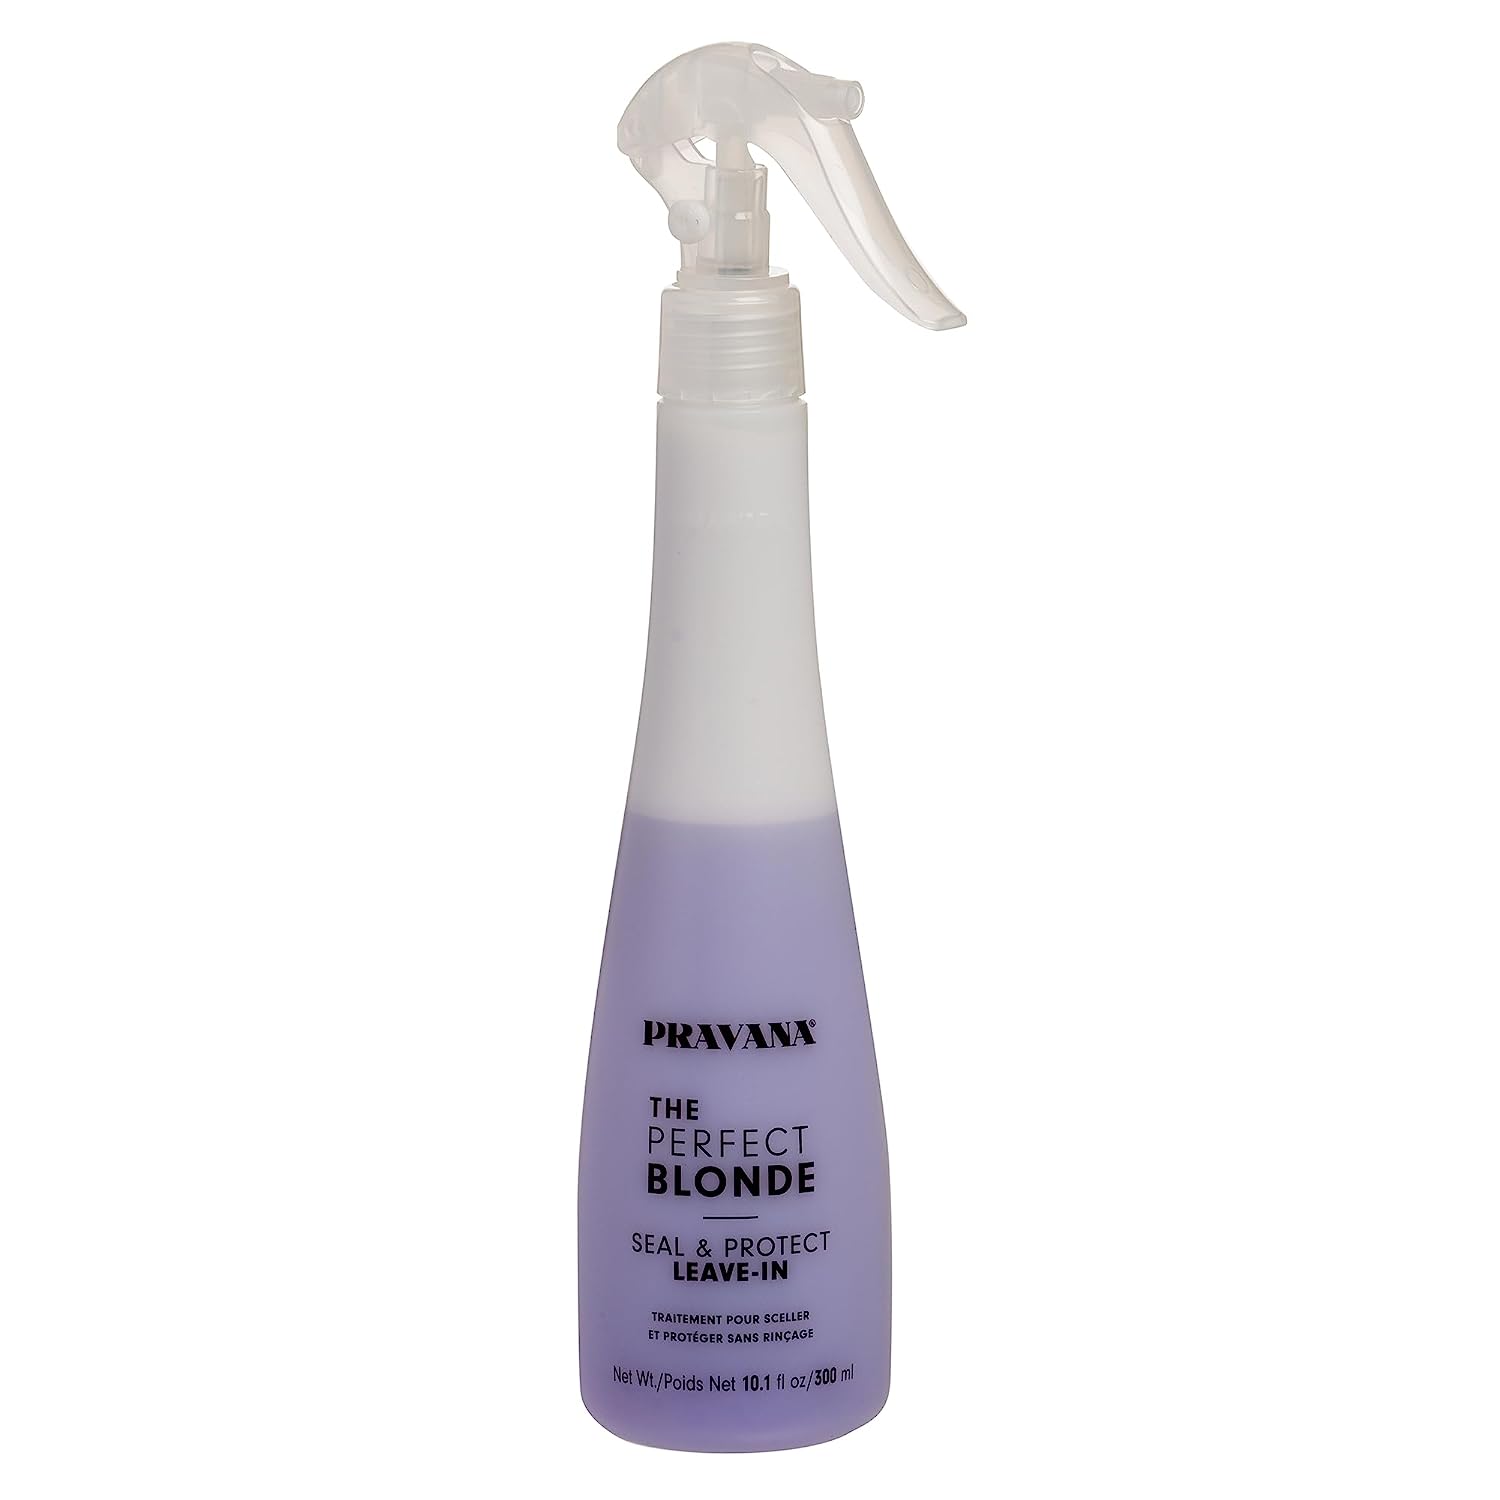 Pravana The Perfect Blonde Seal and Protect Leave-In [...]